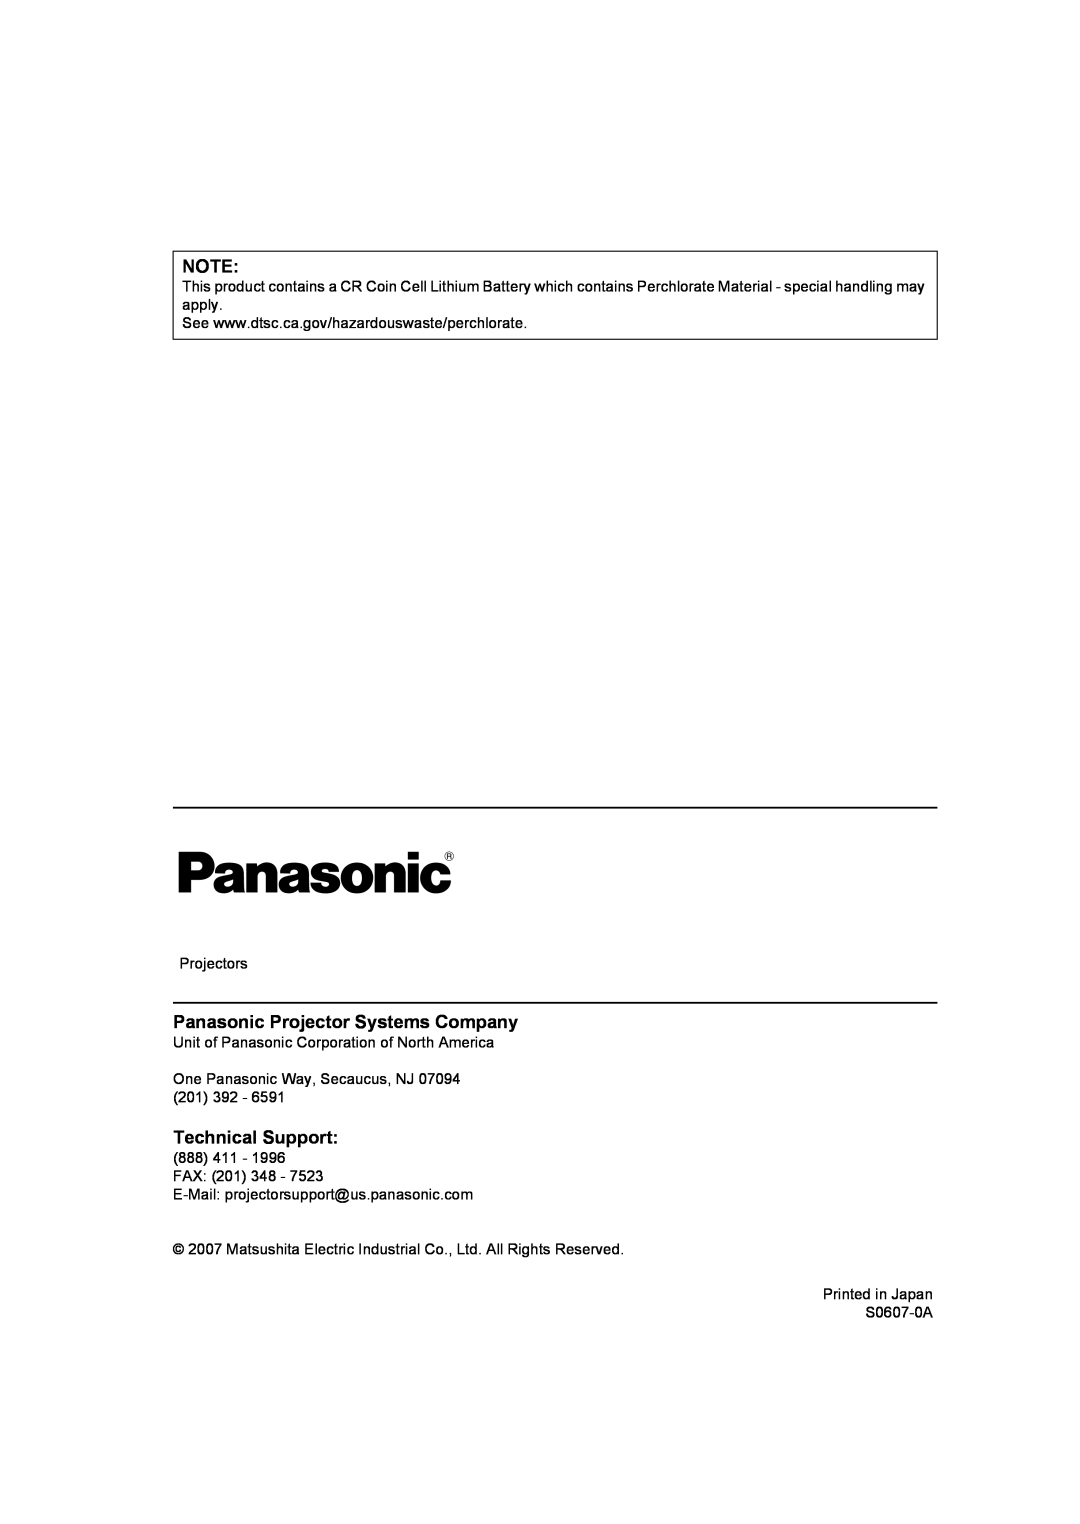 Philips PT-LB51SU manual Panasonic Projector Systems Company, Technical Support, Projectors, Printed in Japan S0607-0A 